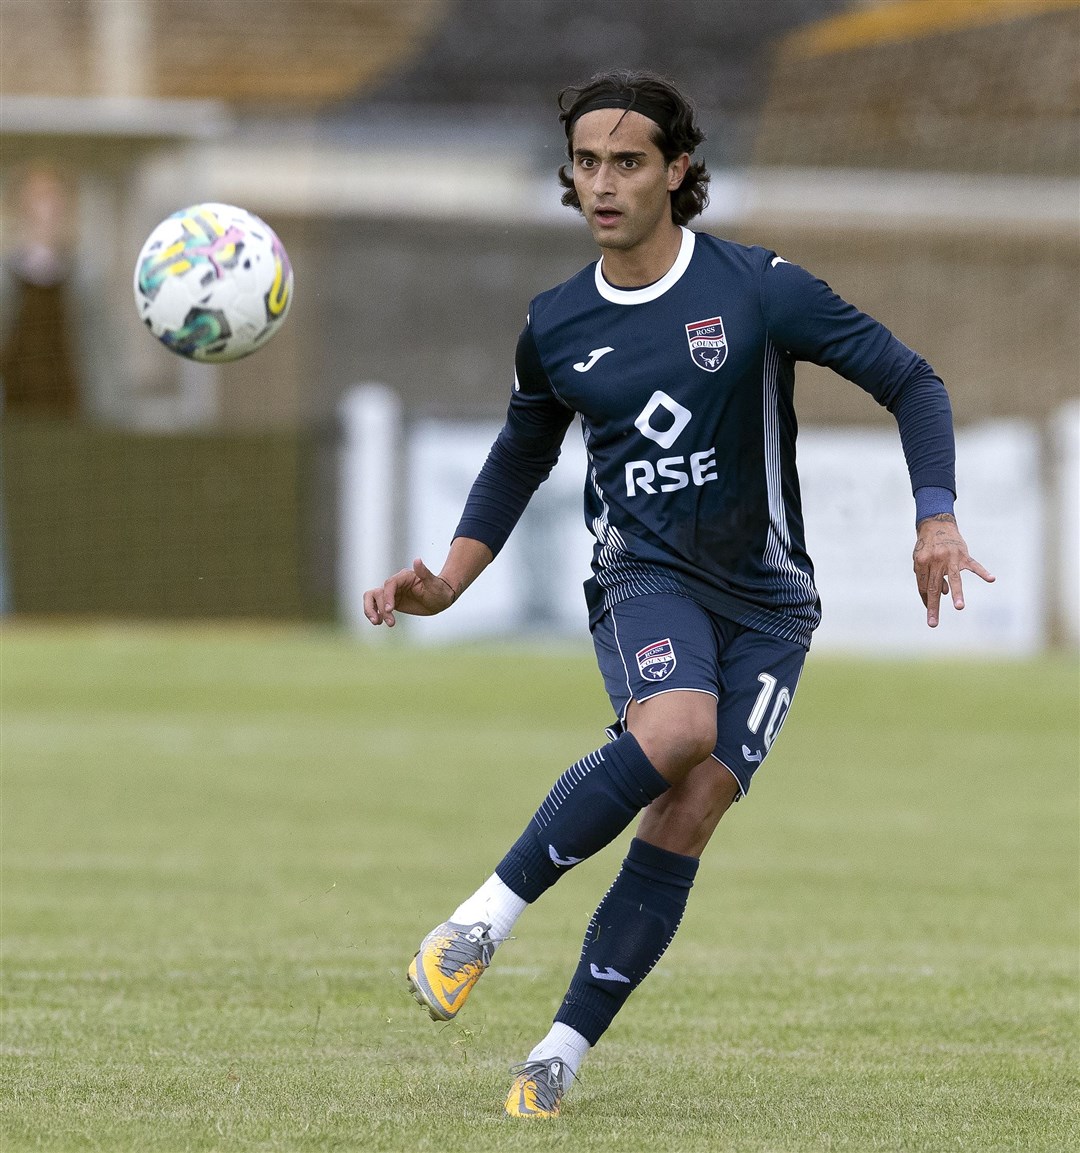 Ross County's Yan Dhanda was heavily involved in County's play